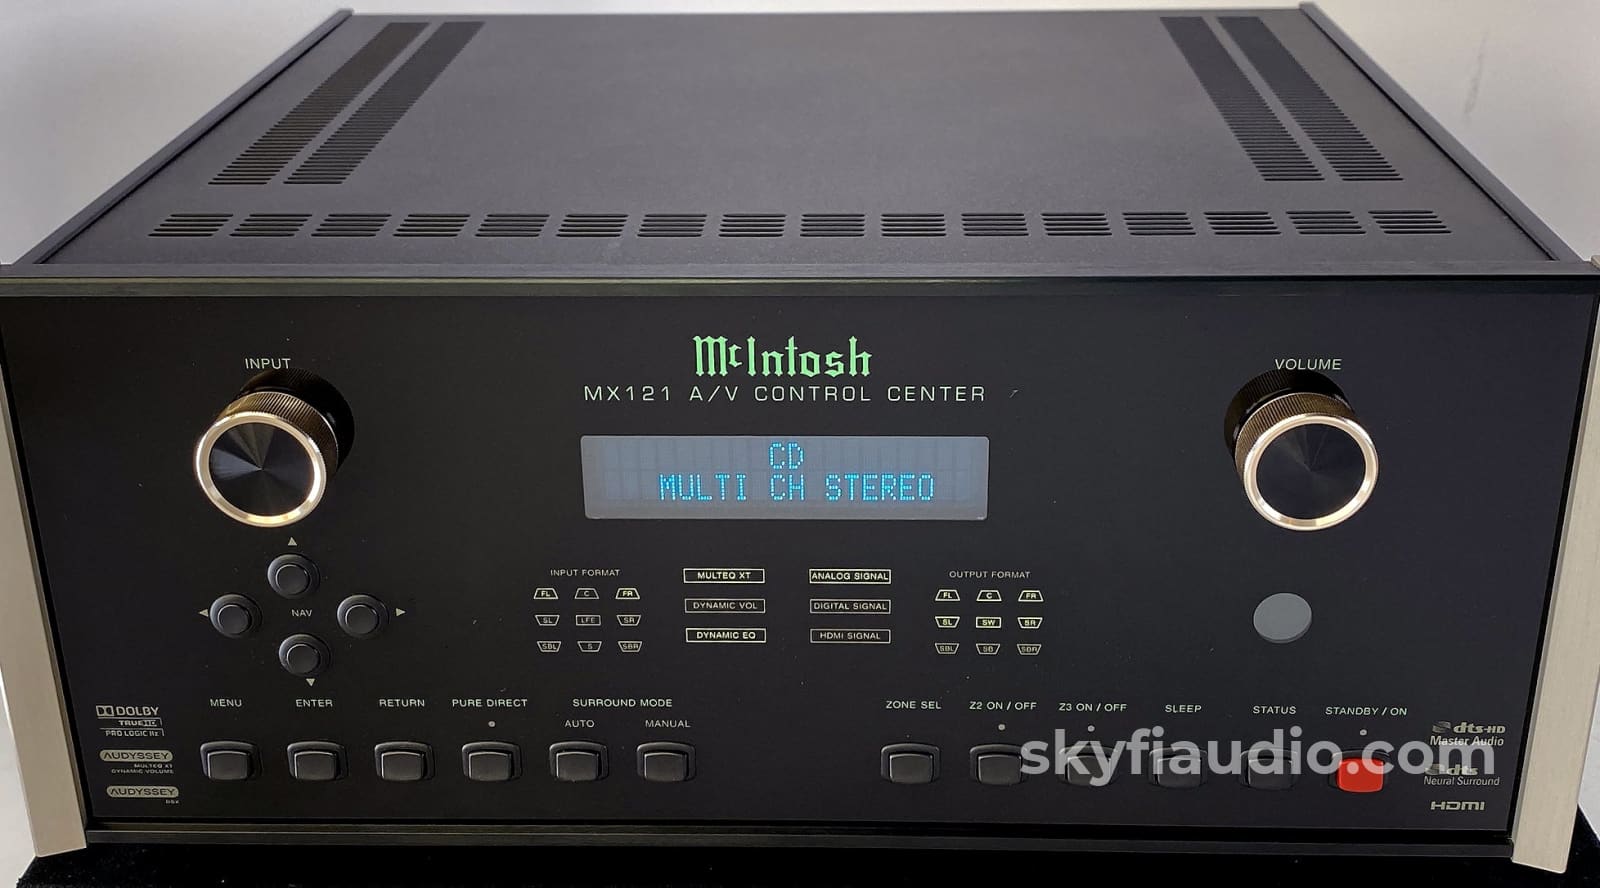 Mcintosh Mx121 Home Theater Processor W/Dolby True Hd And Dts-Hd - Plus Phono Input Preamplifier